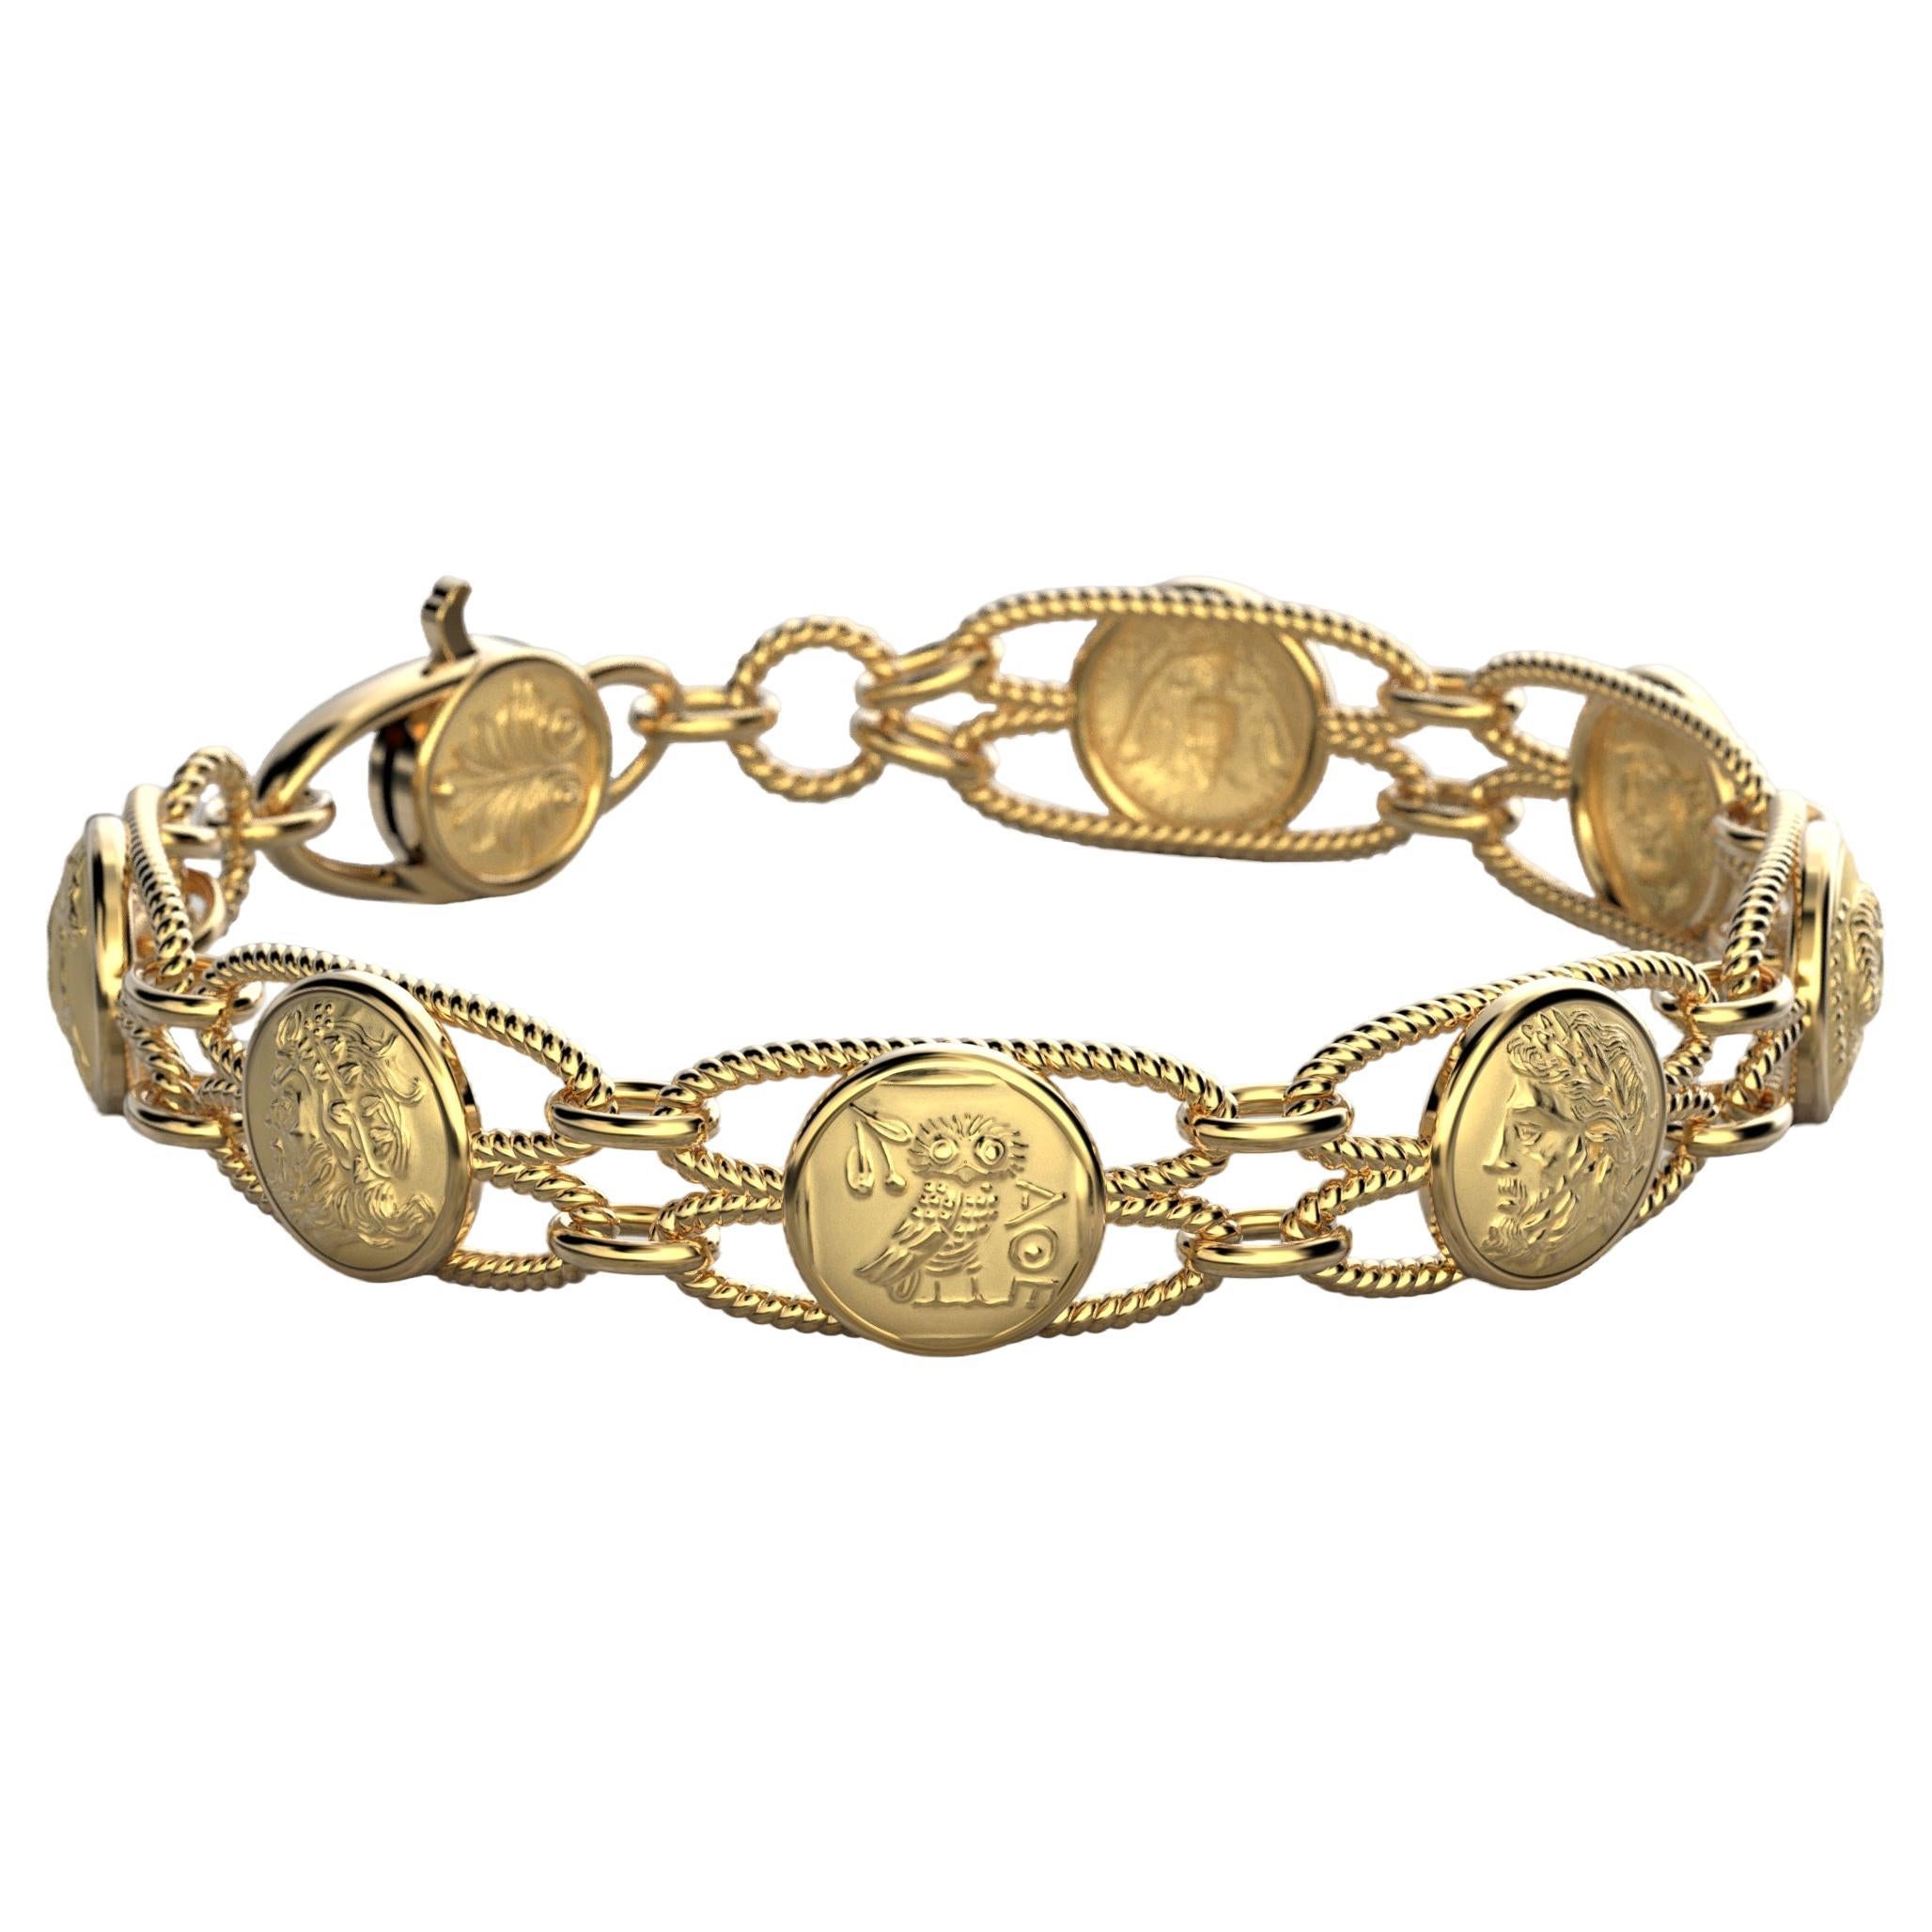 Made to order 18k Gold Bracelet.
Discover our Italian Gold Bracelet in your choice of 14k or 18k solid gold, designed in a captivating Greek Coin Style Link with a delicate rope chain. This exquisite piece of Italian Fine Jewelry is meticulously